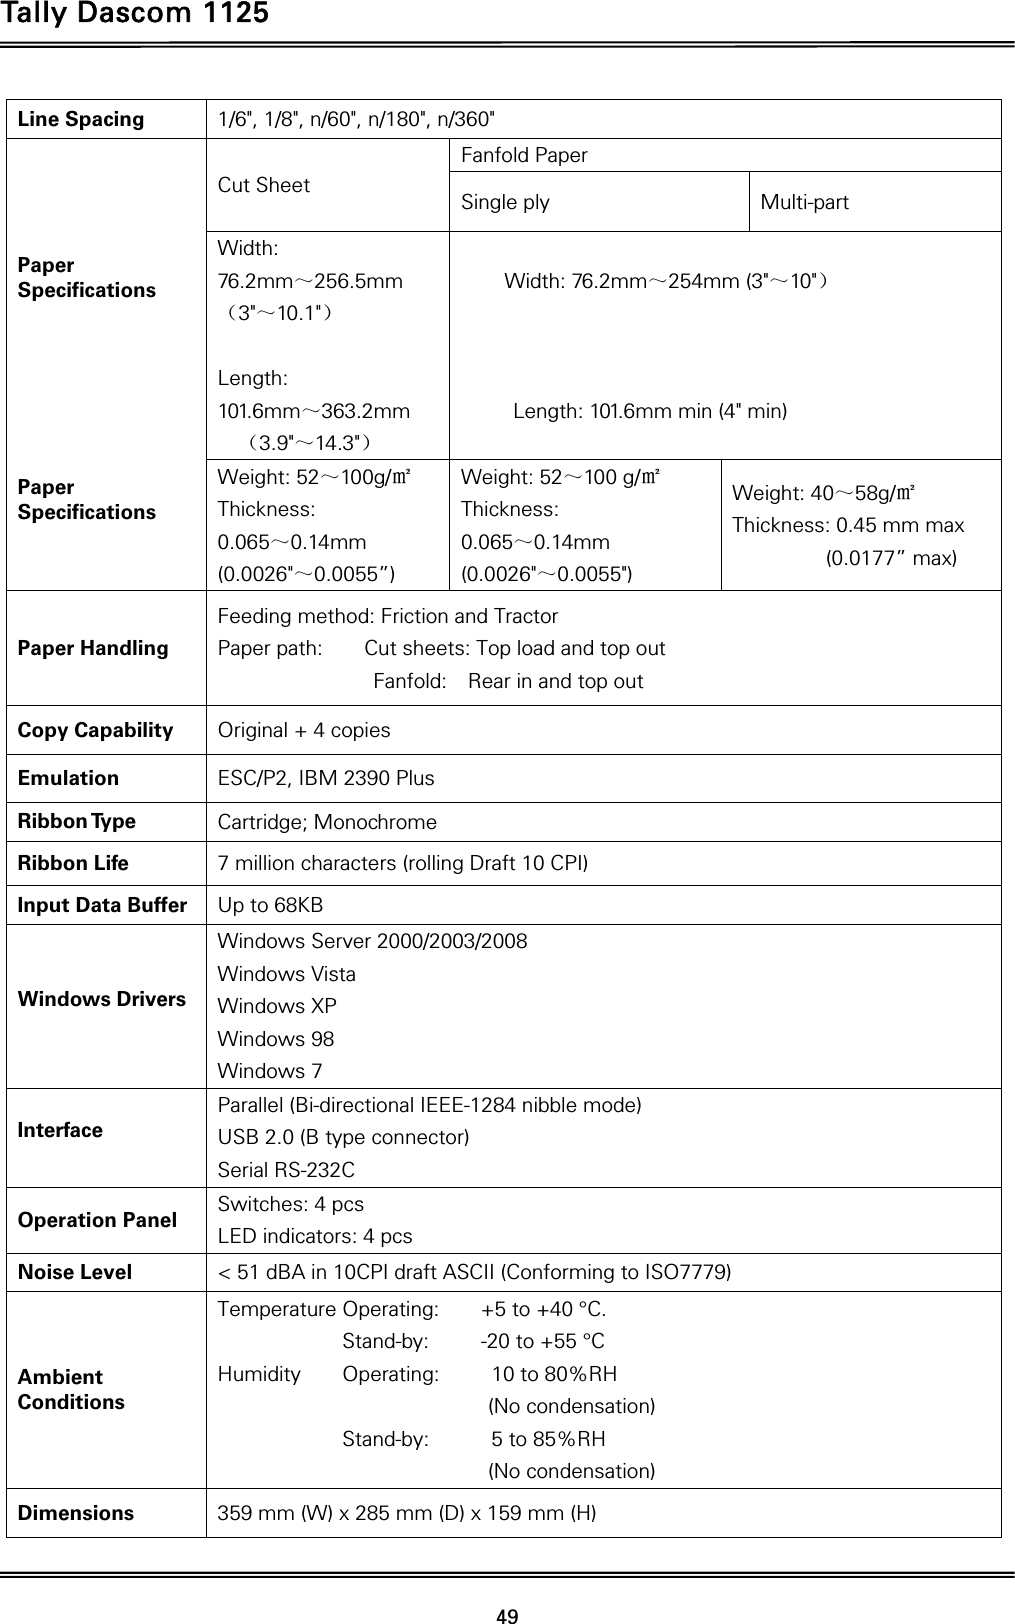 Tally Dascom 1125 49 Line Spacing  1/6&quot;, 1/8&quot;, n/60&quot;, n/180&quot;, n/360&quot;    Paper Specifications        Paper Specifications  Cut Sheet Fanfold Paper Single ply  Multi-part Width: 76.2mm̚256.5mm ˄3&quot;̚10.1&quot;˅  Length: 101.6mm̚363.2mm ˄3.9&quot;̚14.3&quot;˅   Width: 76.2mm̚254mm (3&quot;̚10&quot;˅    Length: 101.6mm min (4&quot; min) Weight: 52̚100g/΃ Thickness: 0.065̚0.14mm (0.0026&quot;̚0.0055”) Weight: 52̚100 g/΃ Thickness:  0.065̚0.14mm (0.0026&quot;̚0.0055&quot;) Weight: 40̚58g/΃ Thickness: 0.45 mm max          (0.0177” max) Paper Handling Feeding method: Friction and Tractor Paper path:        Cut sheets: Top load and top out Fanfold:  Rear in and top out Copy Capability  Original + 4 copies   Emulation  ESC/P2, IBM 2390 Plus Ribbon Type  Cartridge; Monochrome Ribbon Life  7 million characters (rolling Draft 10 CPI) Input Data Buffer  Up to 68KB Windows Drivers Windows Server 2000/2003/2008 Windows Vista Windows XP Windows 98 Windows 7 Interface Parallel (Bi-directional IEEE-1284 nibble mode) USB 2.0 (B type connector) Serial RS-232C Operation Panel  Switches: 4 pcs LED indicators: 4 pcs Noise Level  &lt; 51 dBA in 10CPI draft ASCII (Conforming to ISO7779) Ambient Conditions Temperature Operating:    +5 to +40 °C.             Stand-by:     -20 to +55 °C Humidity    Operating:     10 to 80%RH  (No condensation)  Stand-by:      5 to 85%RH  (No condensation) Dimensions  359 mm (W) x 285 mm (D) x 159 mm (H) 